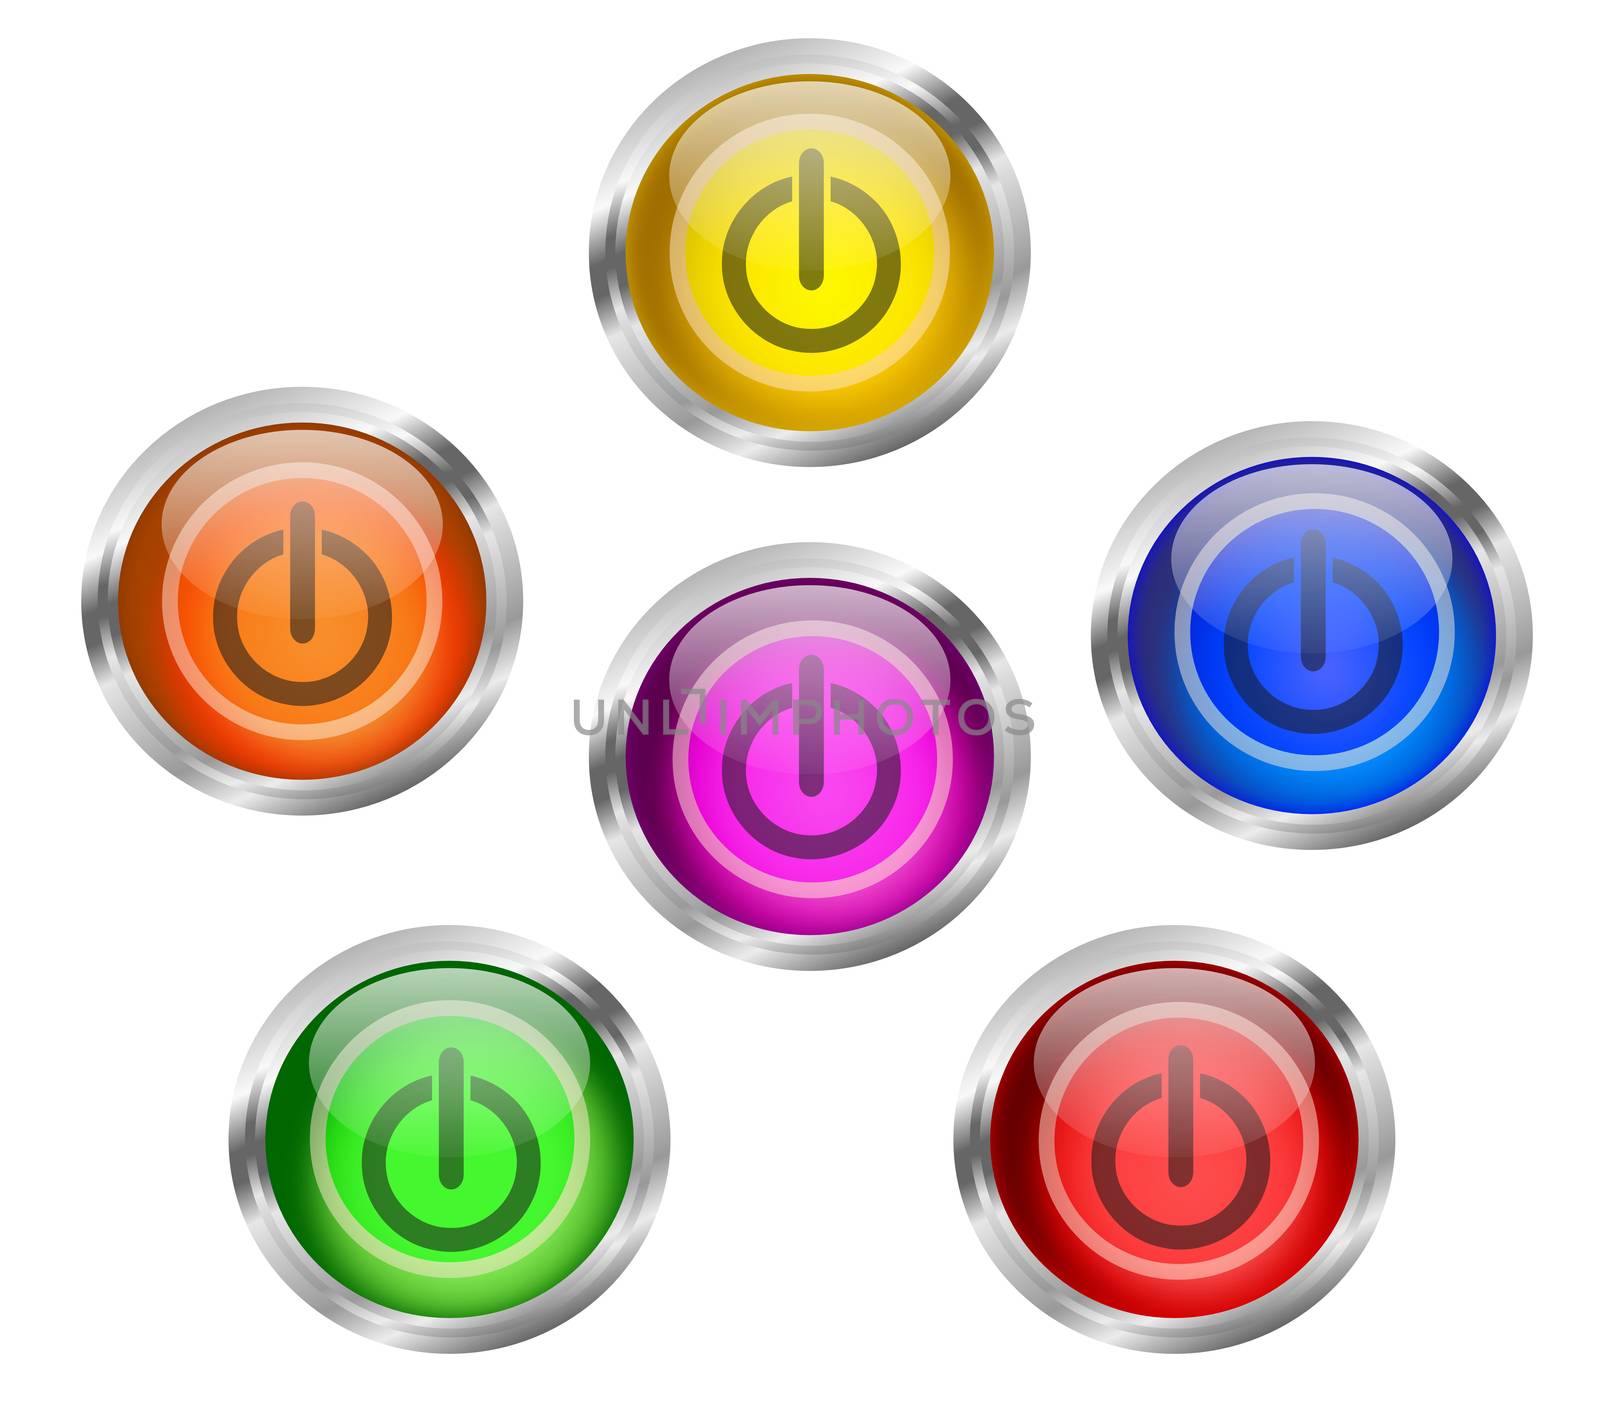 Set of shiny power round web icon buttons in six different colors - yellow, orange, red, green, pink blue, with silver or chrome metallic rim.
